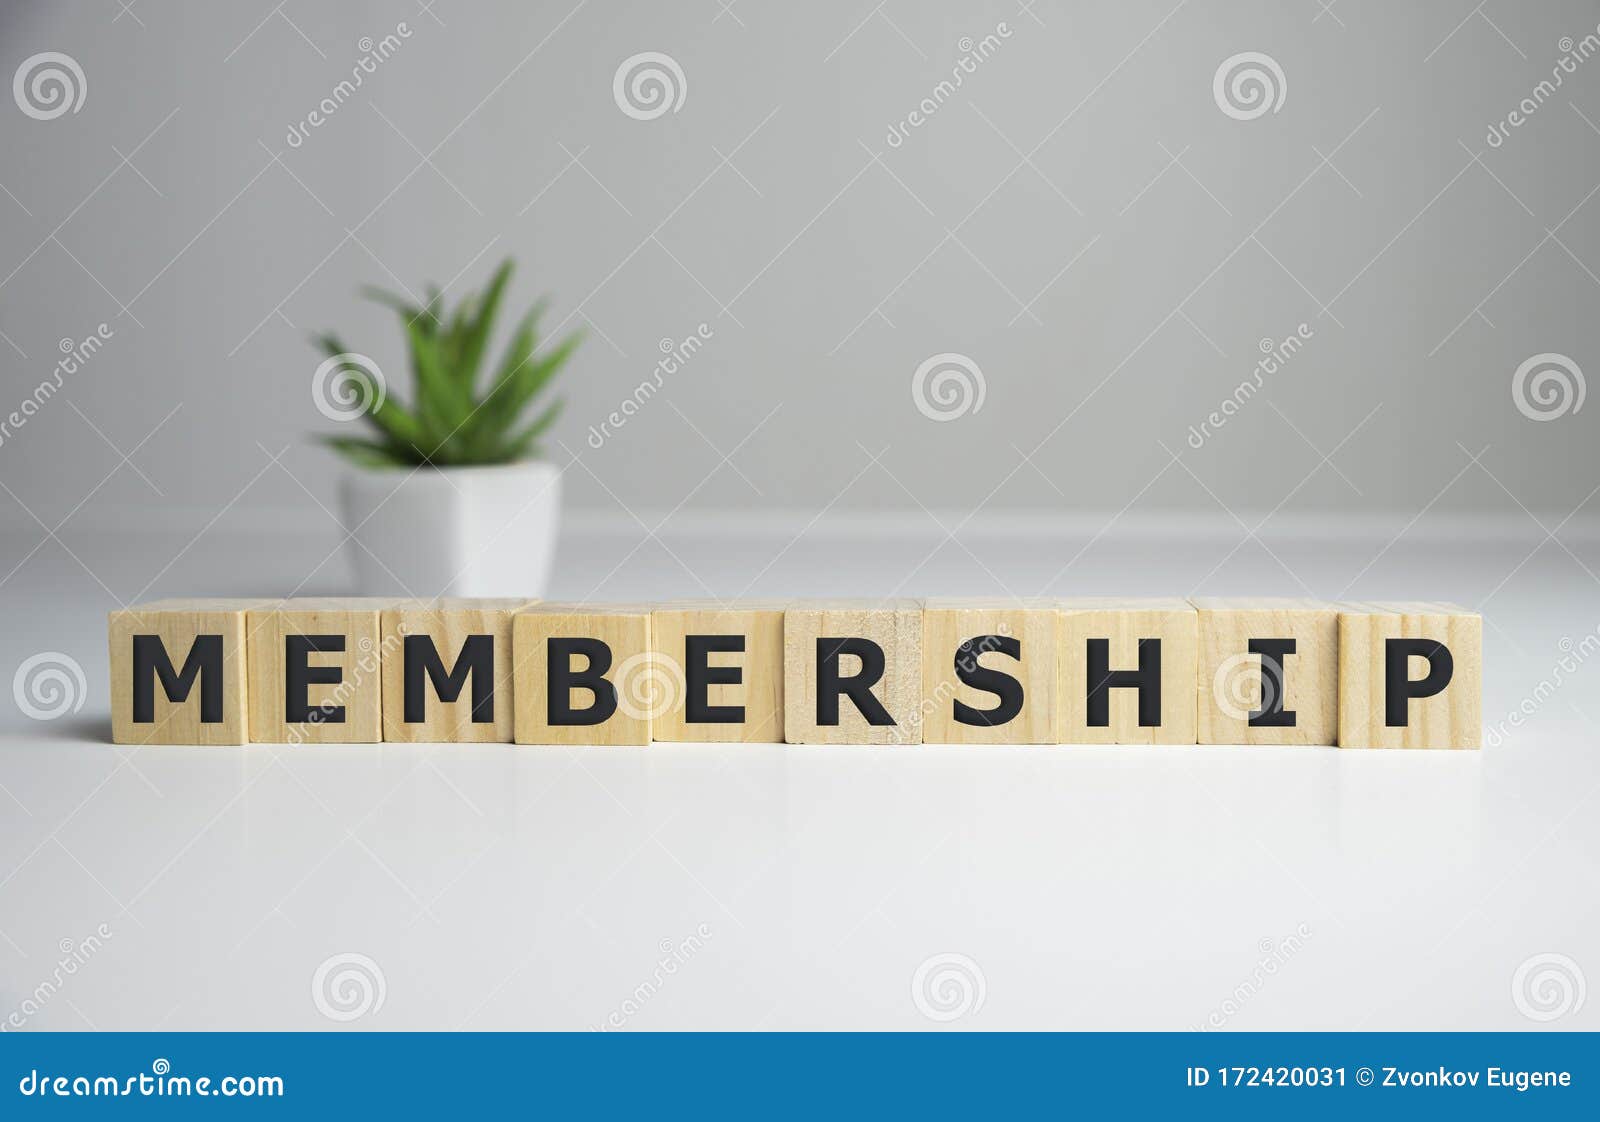 focus on wooden blocks with letters making membership text. concept image